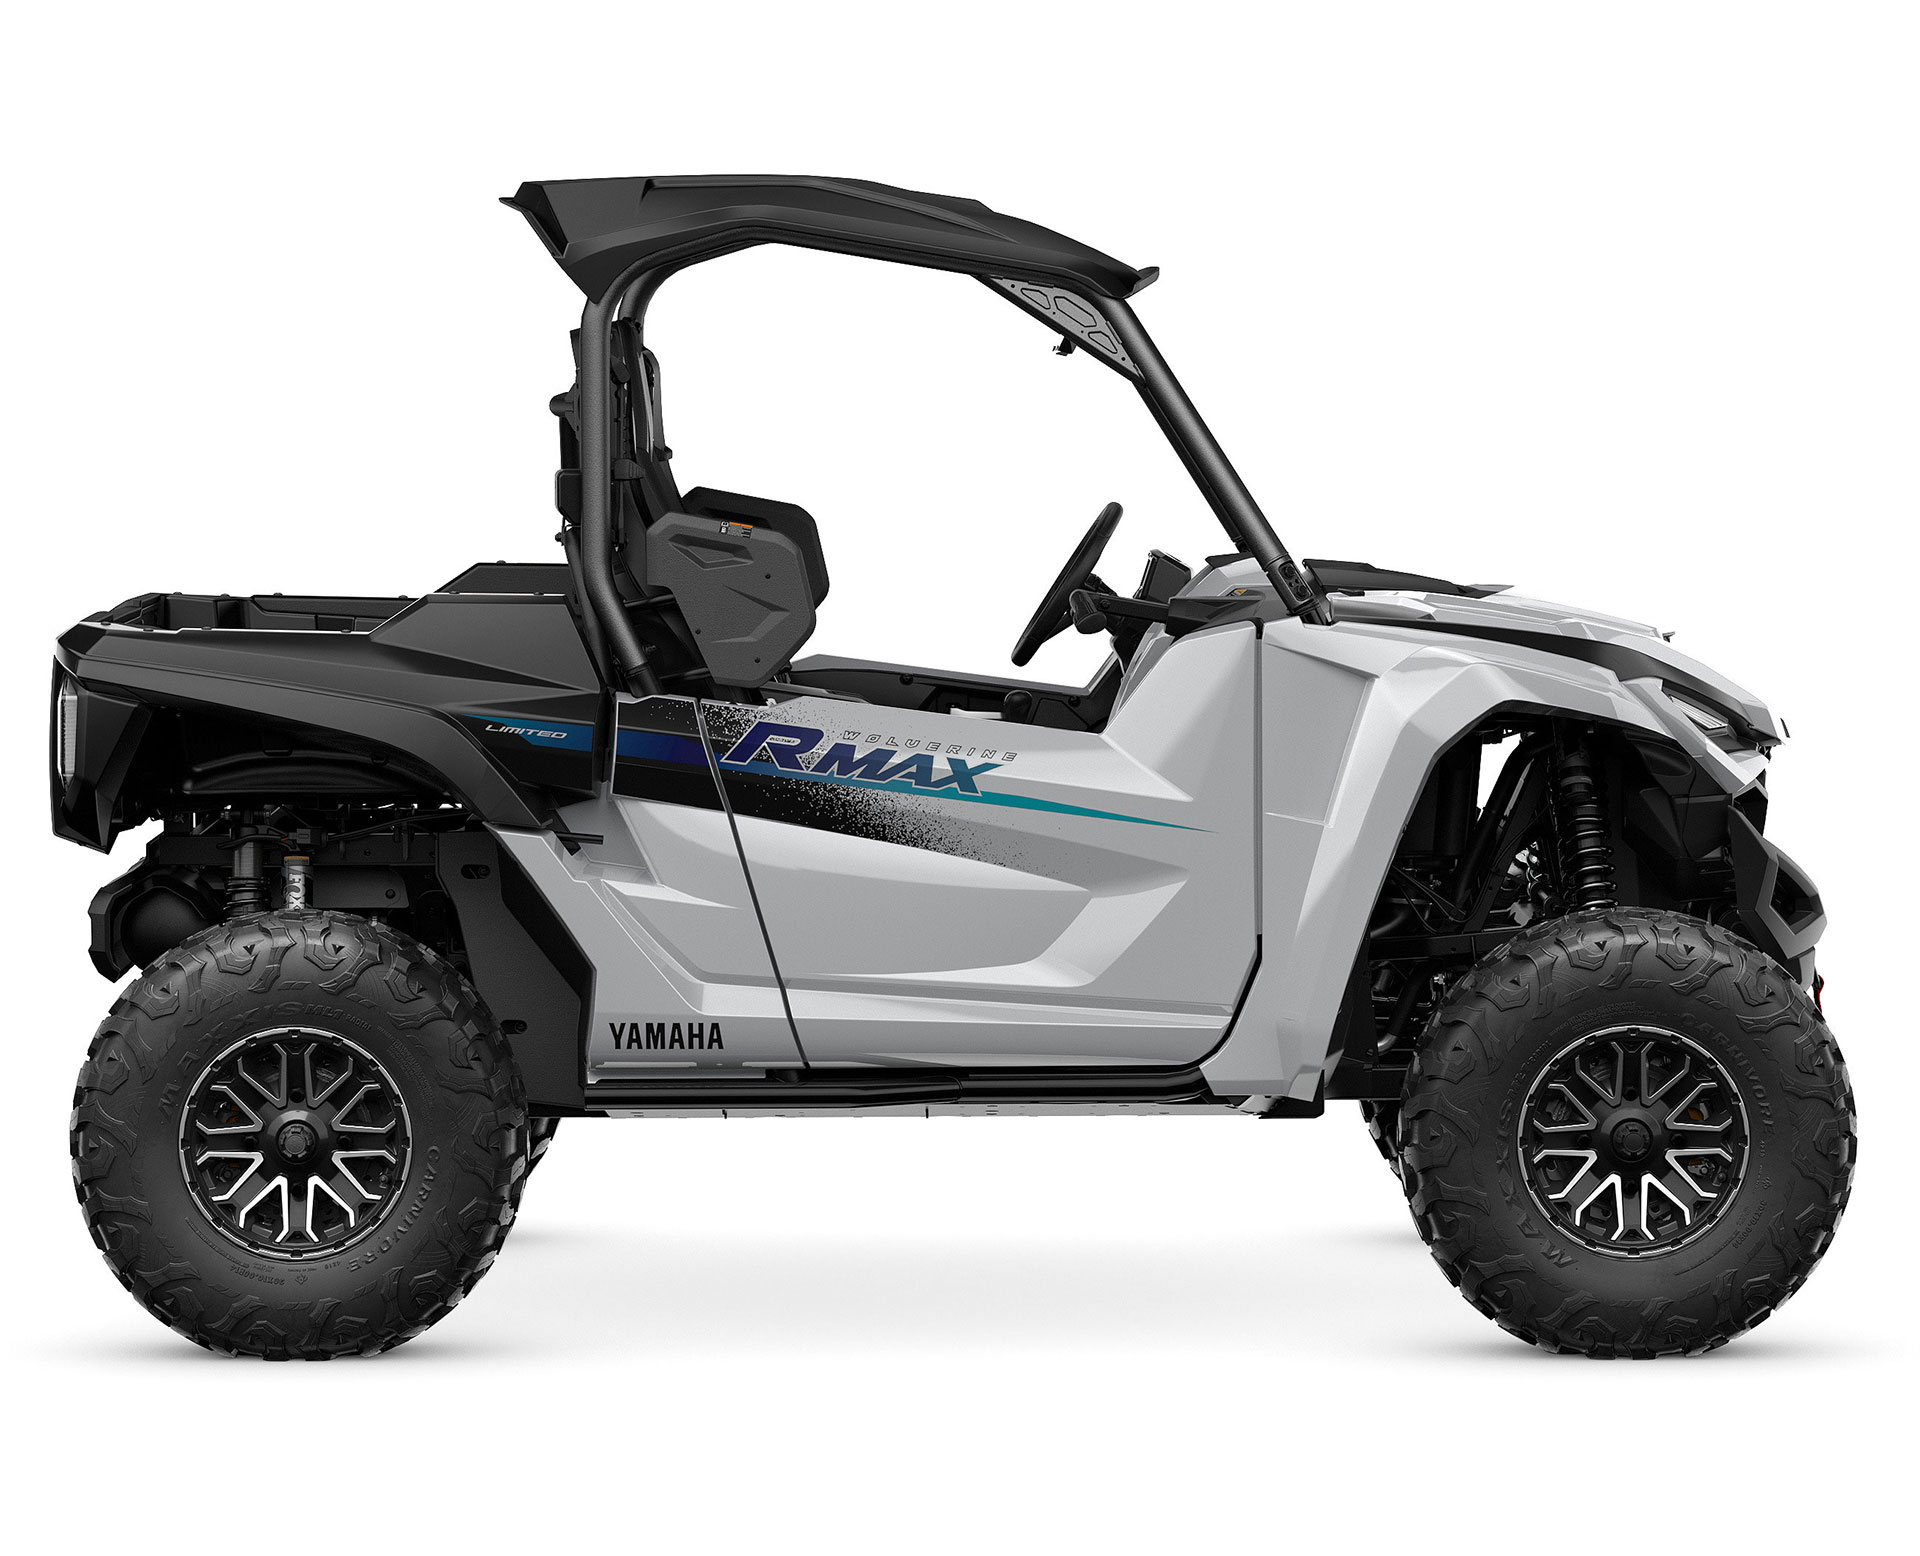 Thumbnail of your customized 2024 WOLVERINE® RMAX2™ 1000 LE